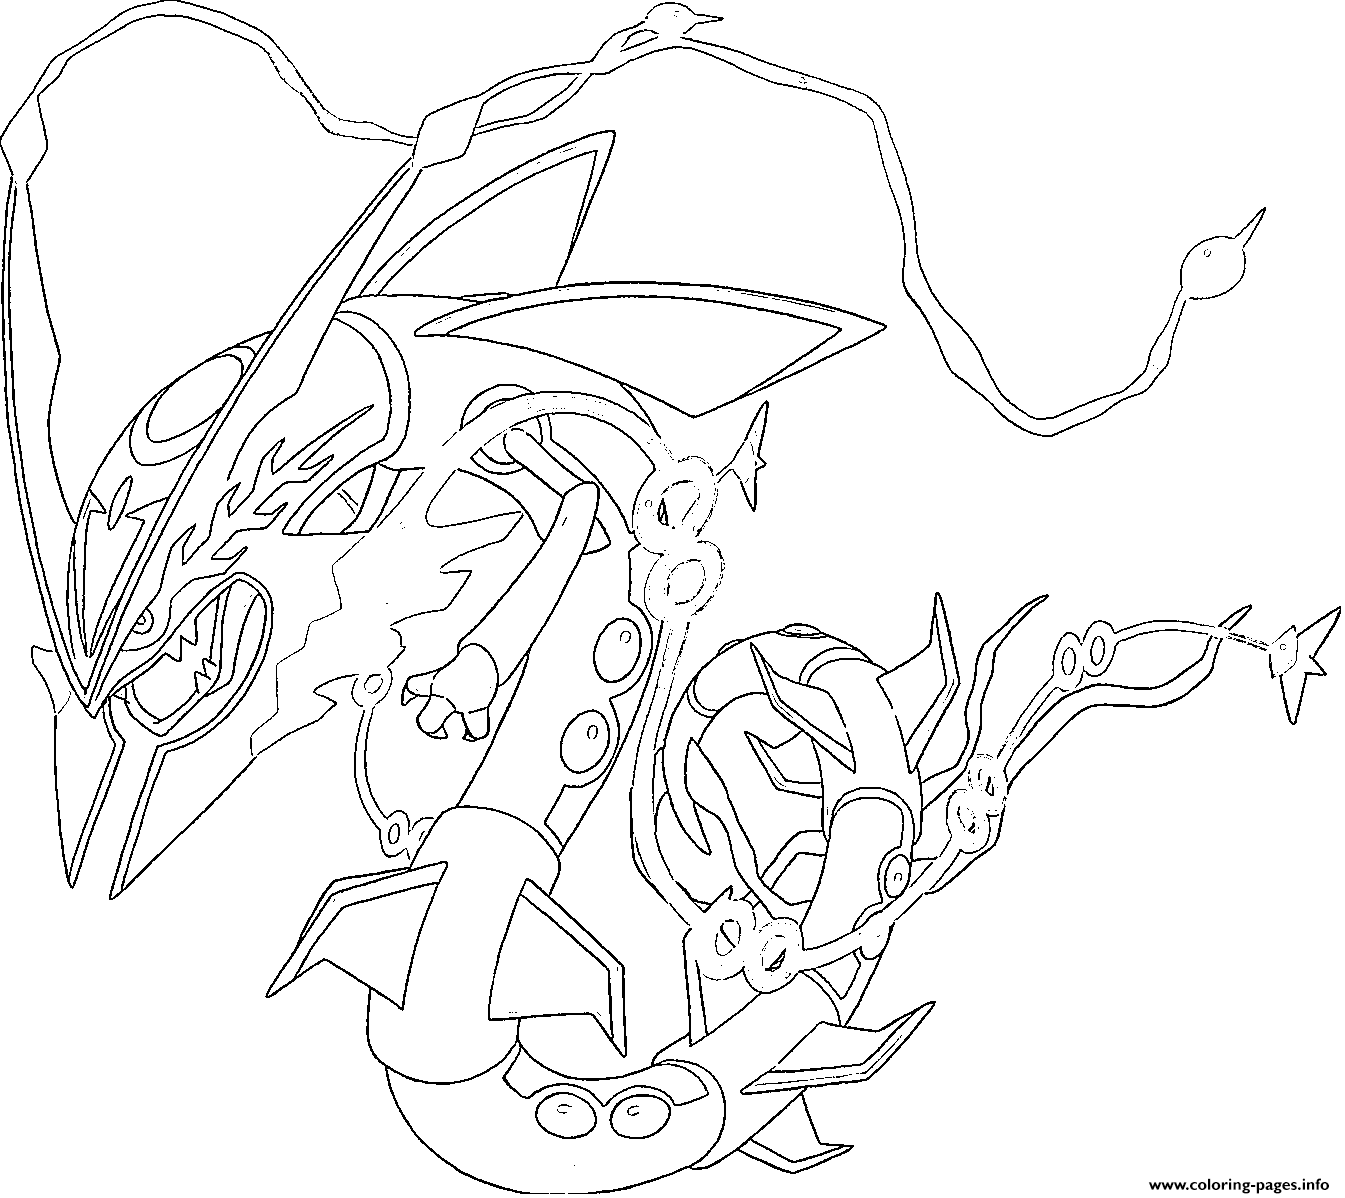  Pokemon  Rayquaza  Coloring  Pages  Sketch Coloring  Page 